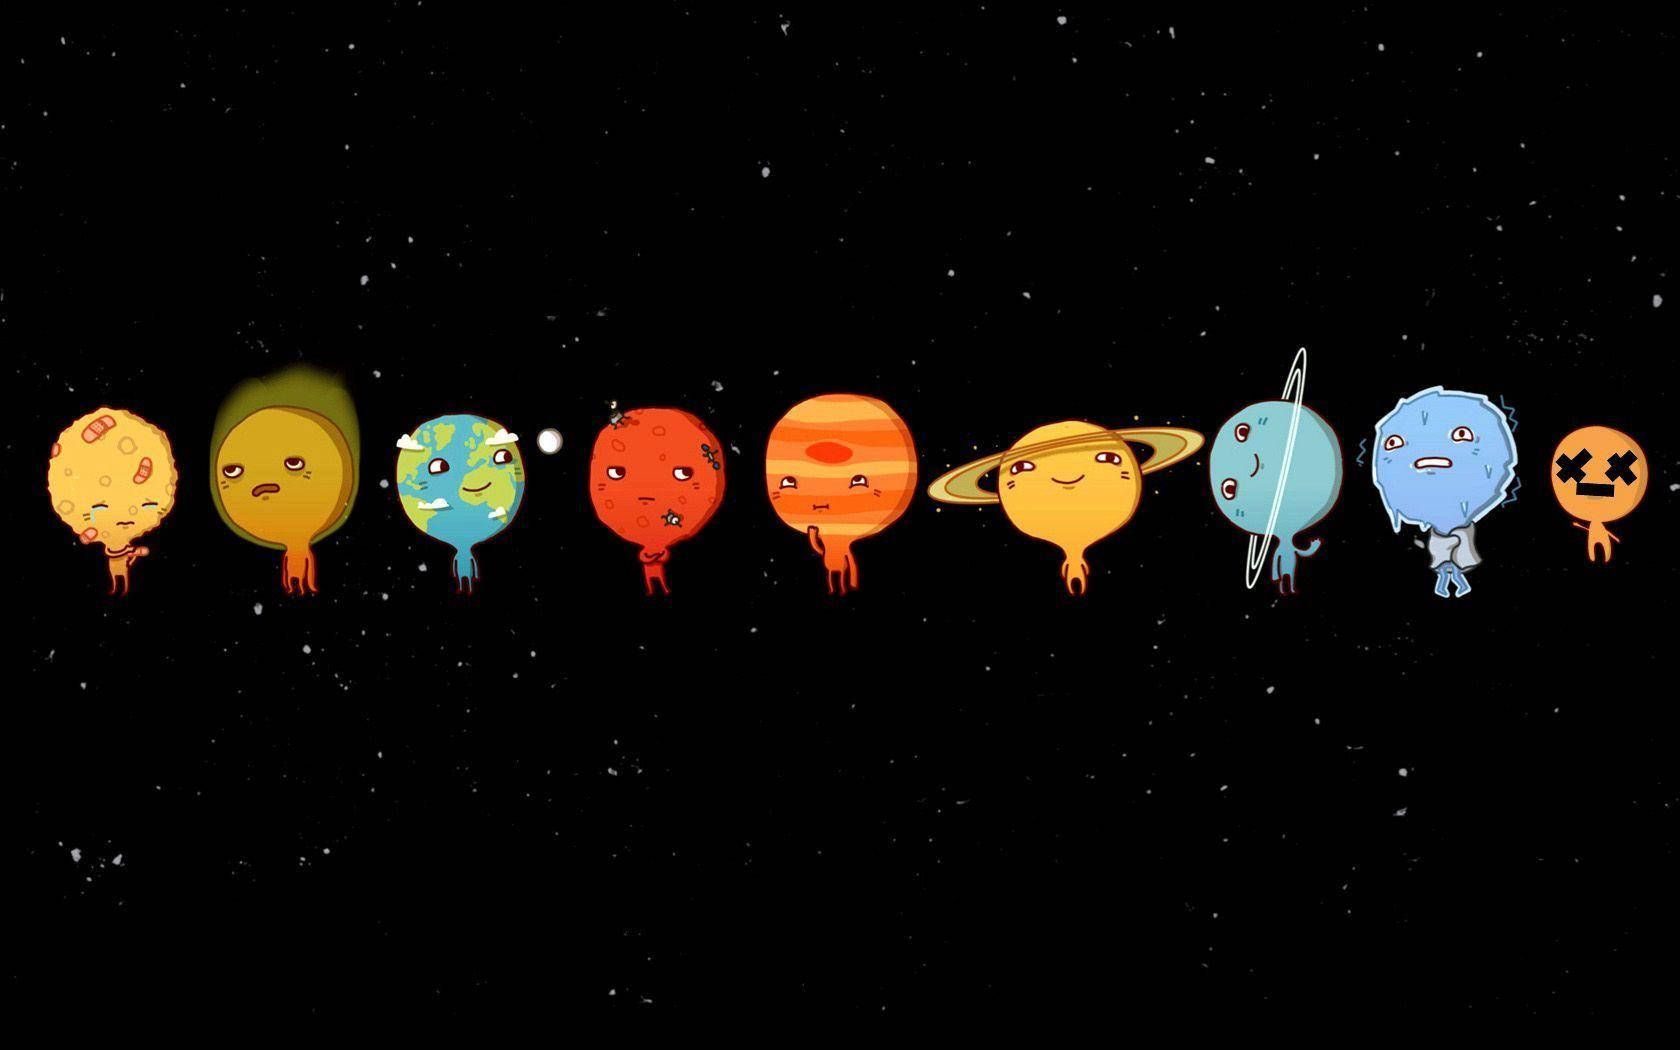 A Group Of Balloons With Different Planets In The Background